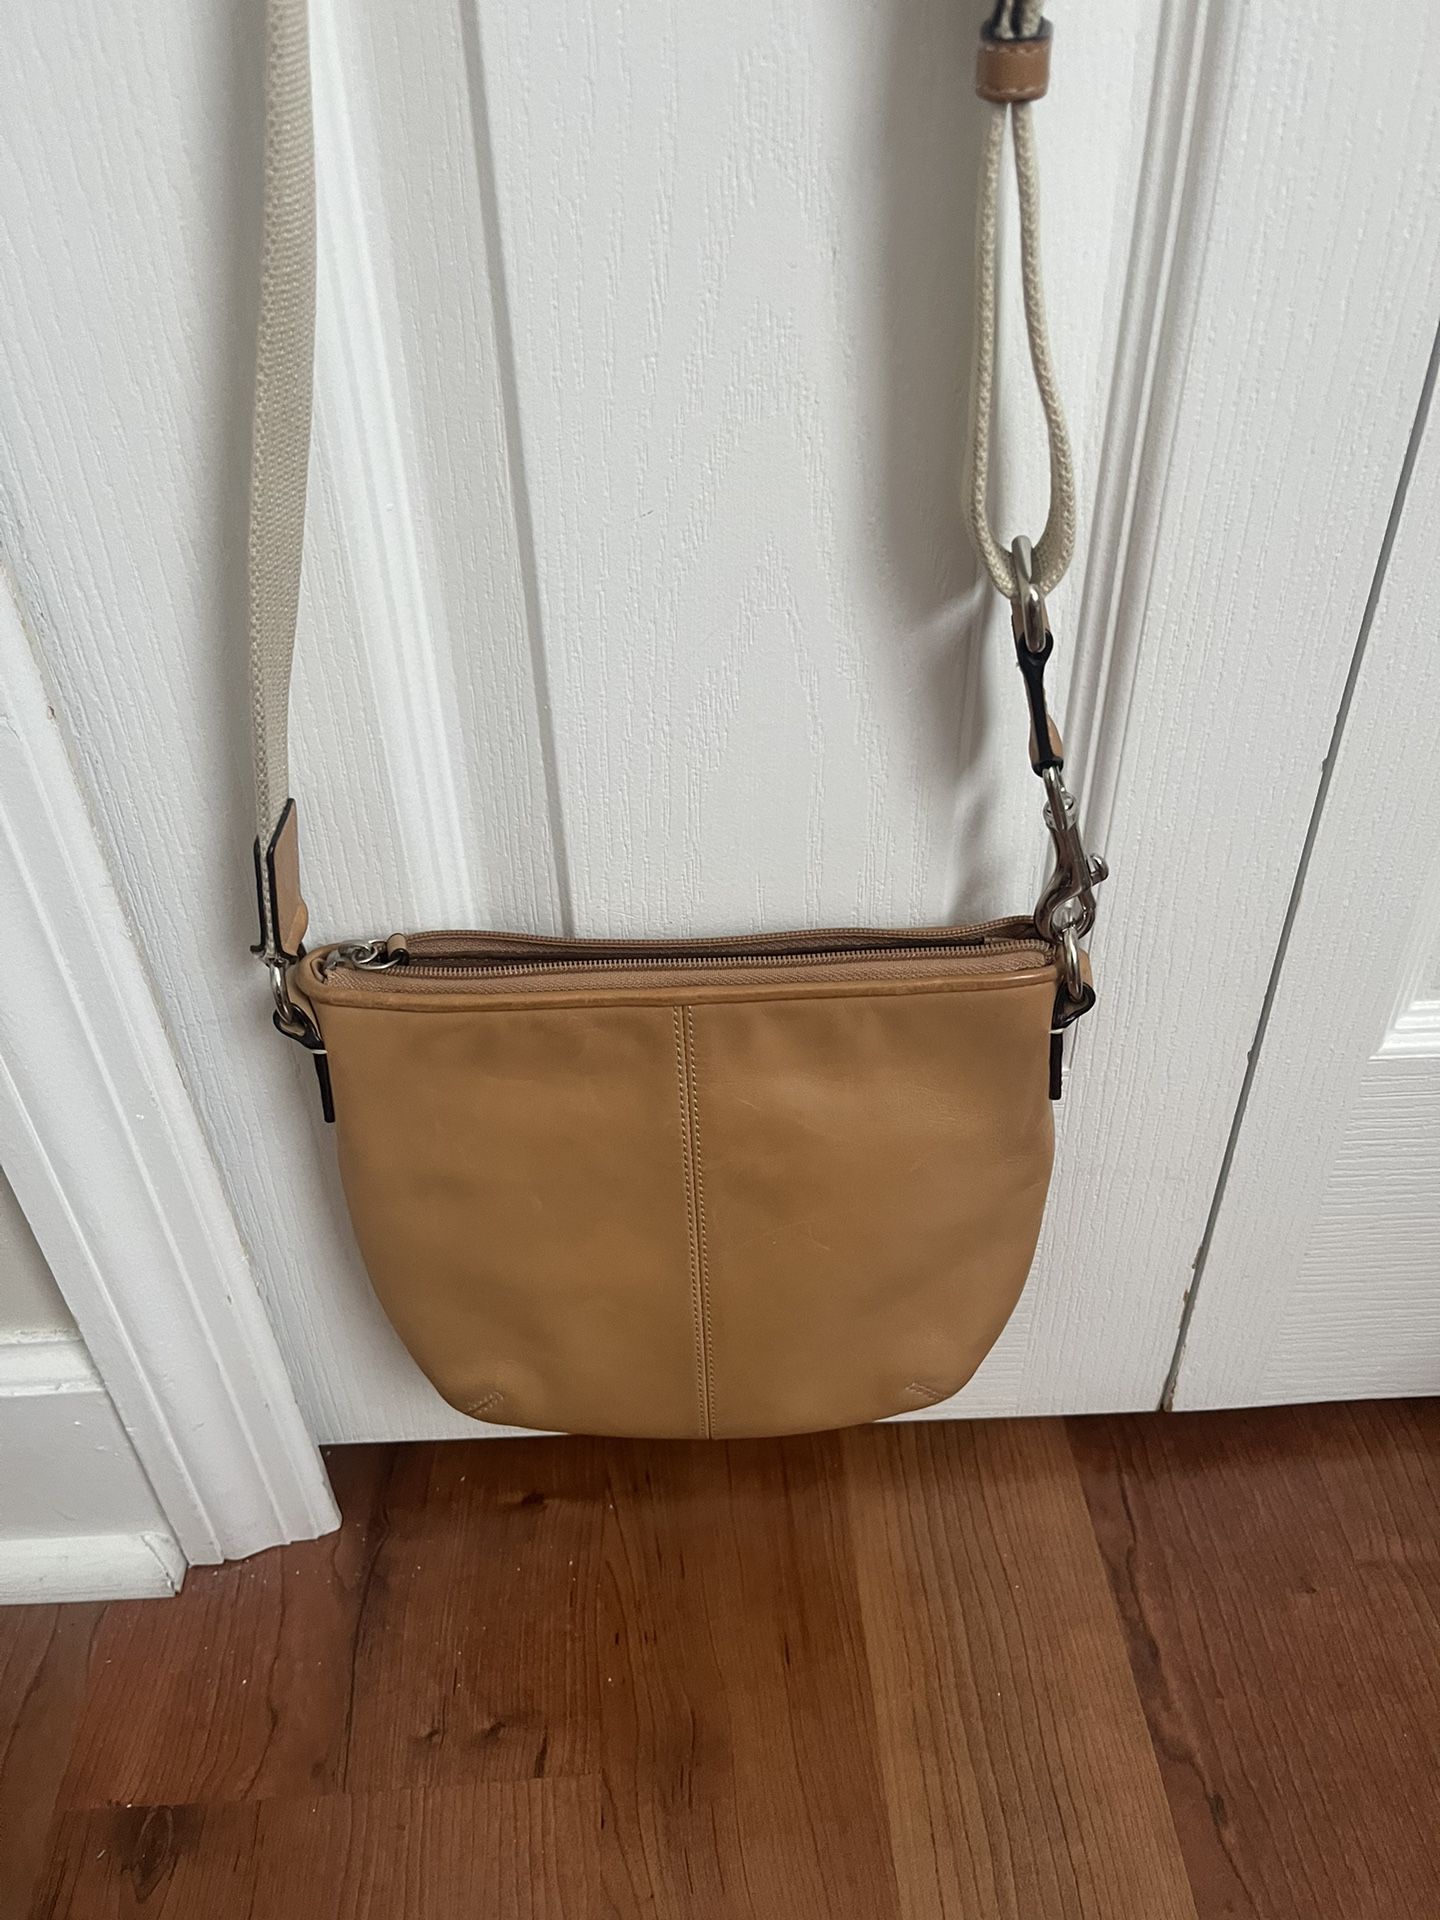 Coach Cross Body Bag Authentic All Leather. Make Me An Offe R Come get It. 